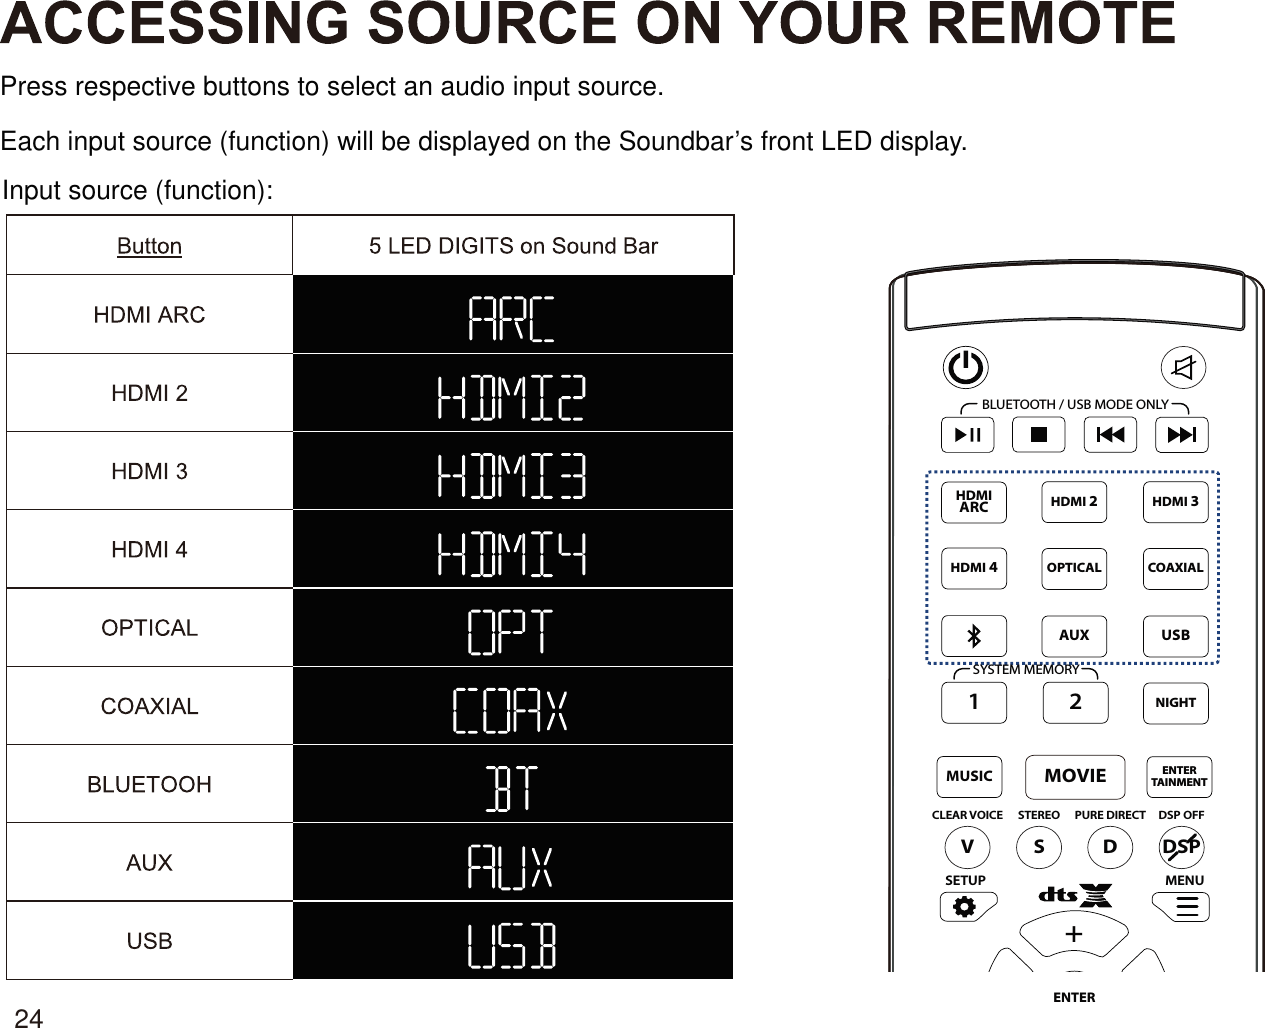 Press respective buttons to select an audio input source.Each input source (function) will be displayed on the Soundbar’s front LED display.Input source (function):BLUETOOTH / USB MODE ONLYSYSTEM MEMORYHDMI 2HDMI 3OPTICAL2AUXHDMIARCHDMI 4COAXIALUSB1NIGHT+SETUP MENUENTERVSDCLEAR VOICE STEREO PURE DIRECT DSP OFFDSPMOVIEENTERTAINMENTMUSIC24